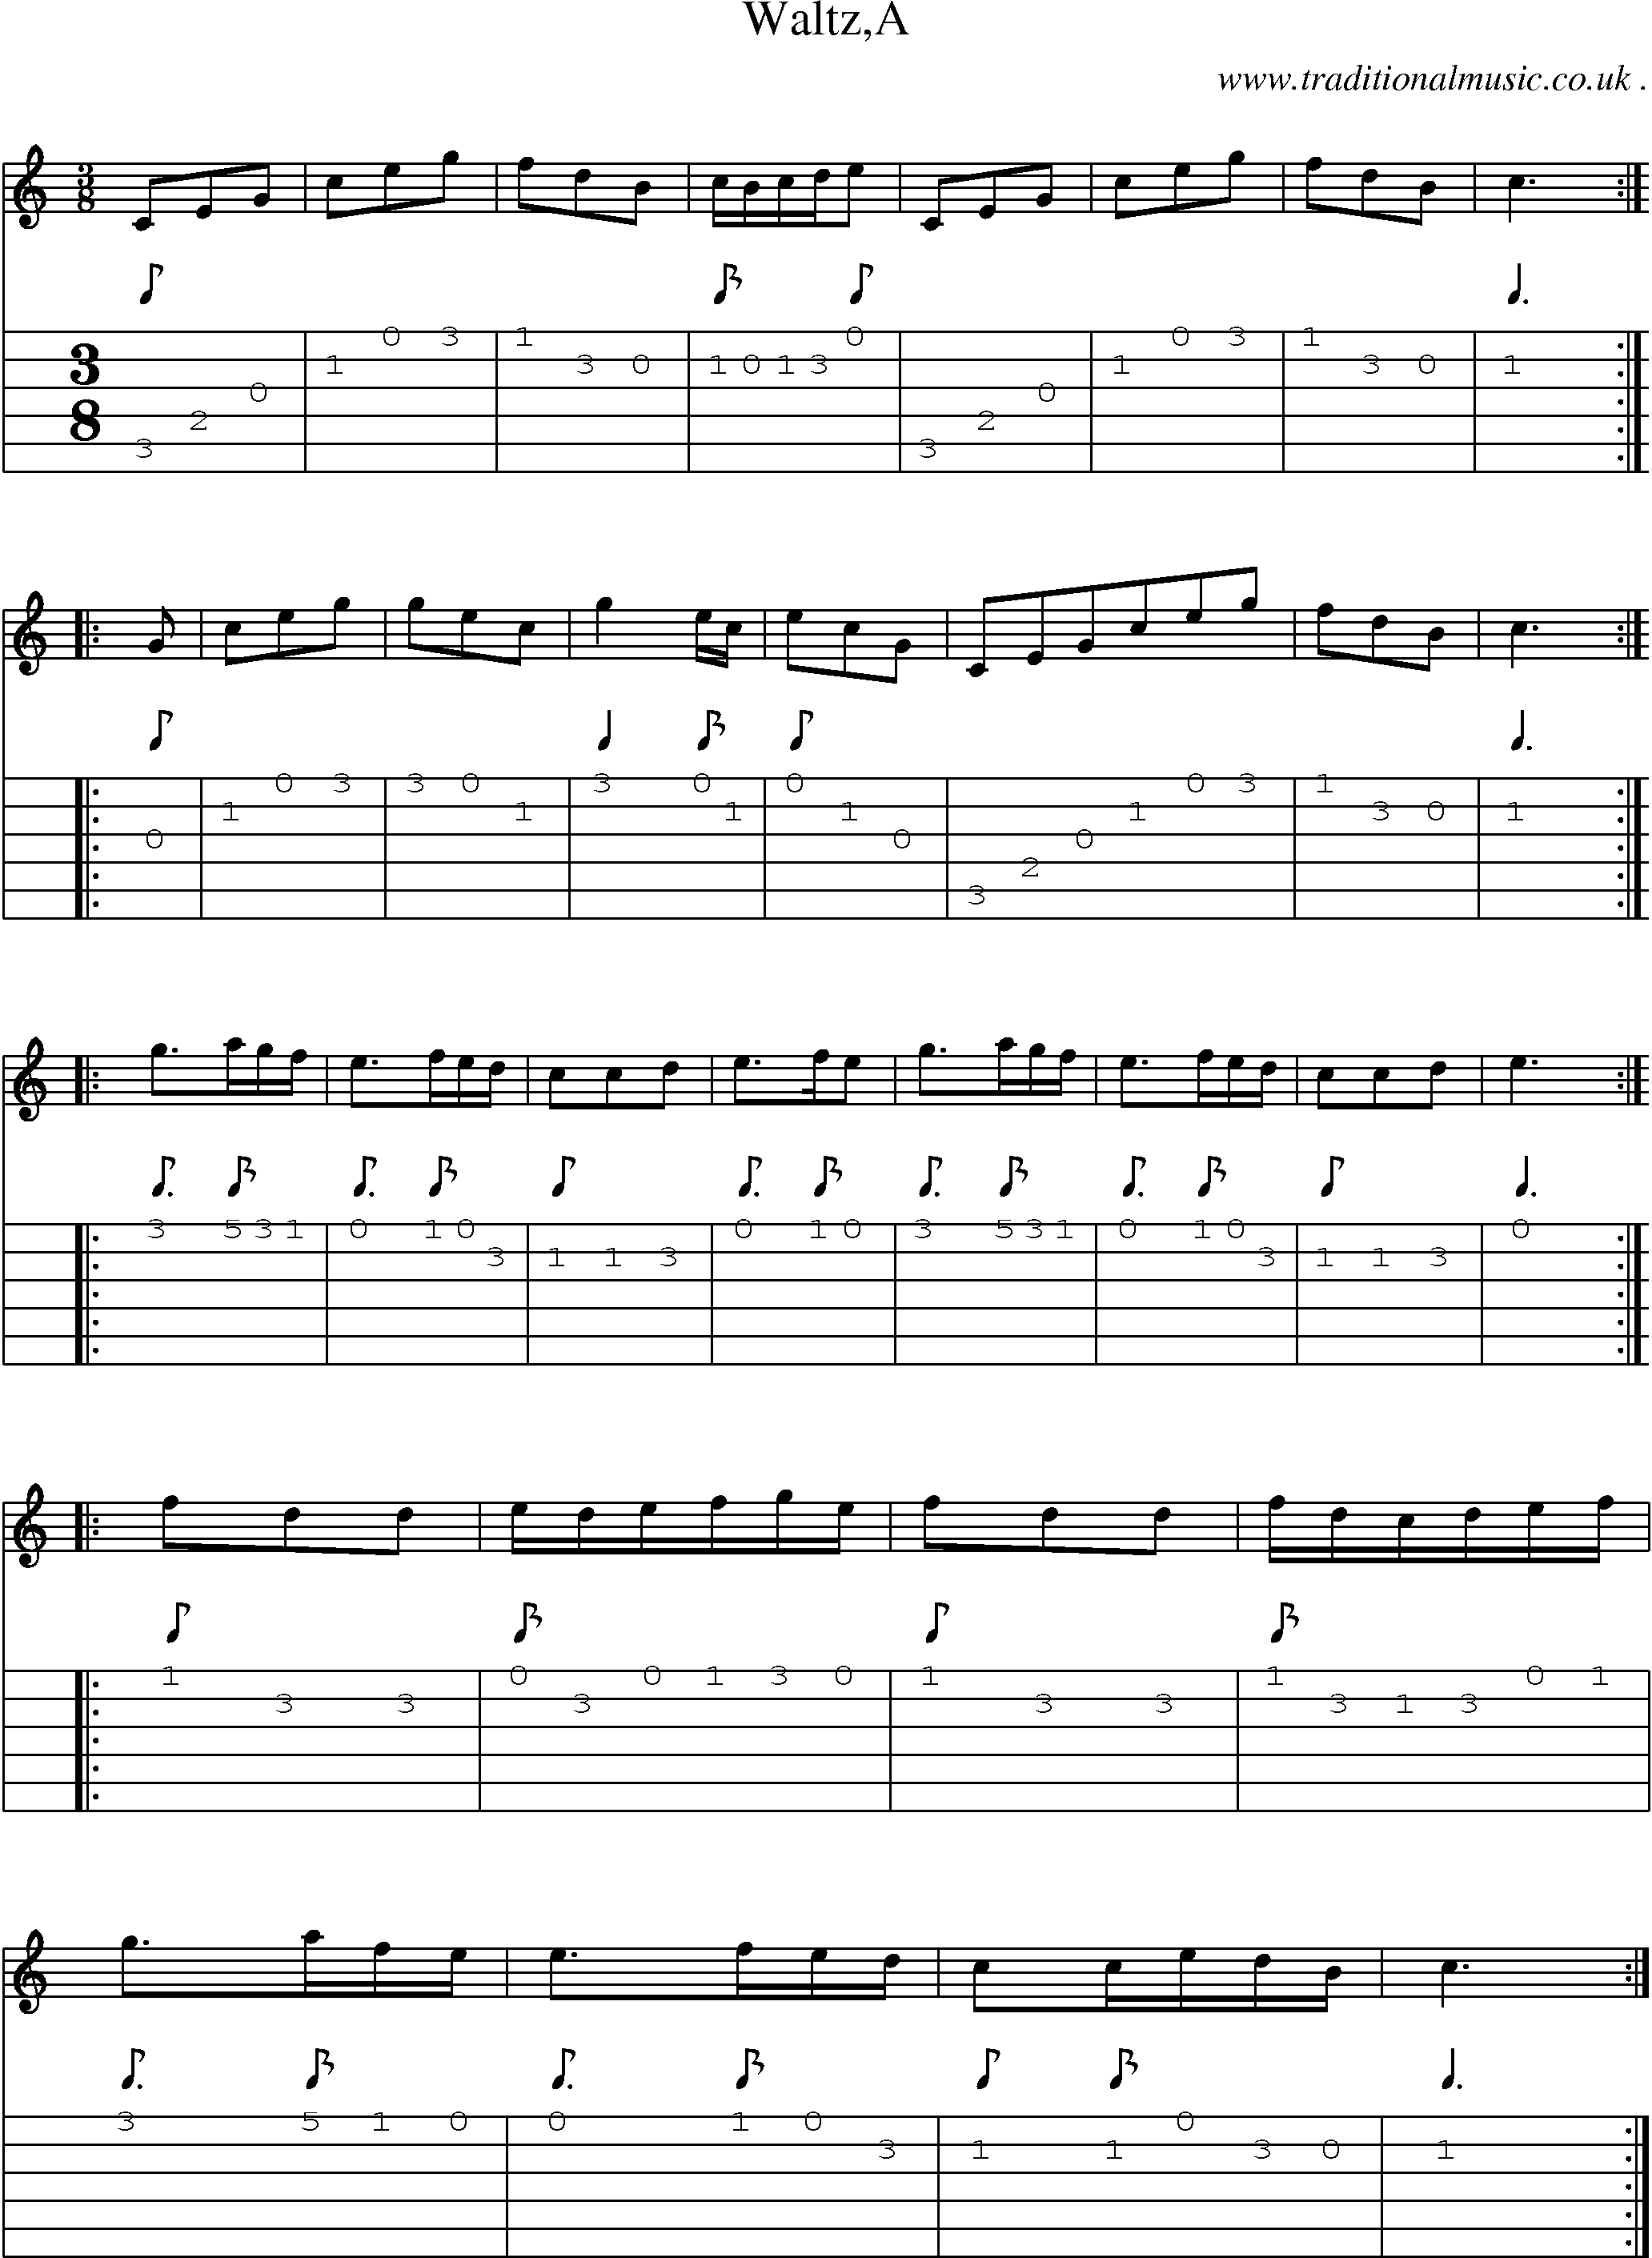 Sheet-Music and Guitar Tabs for Waltza